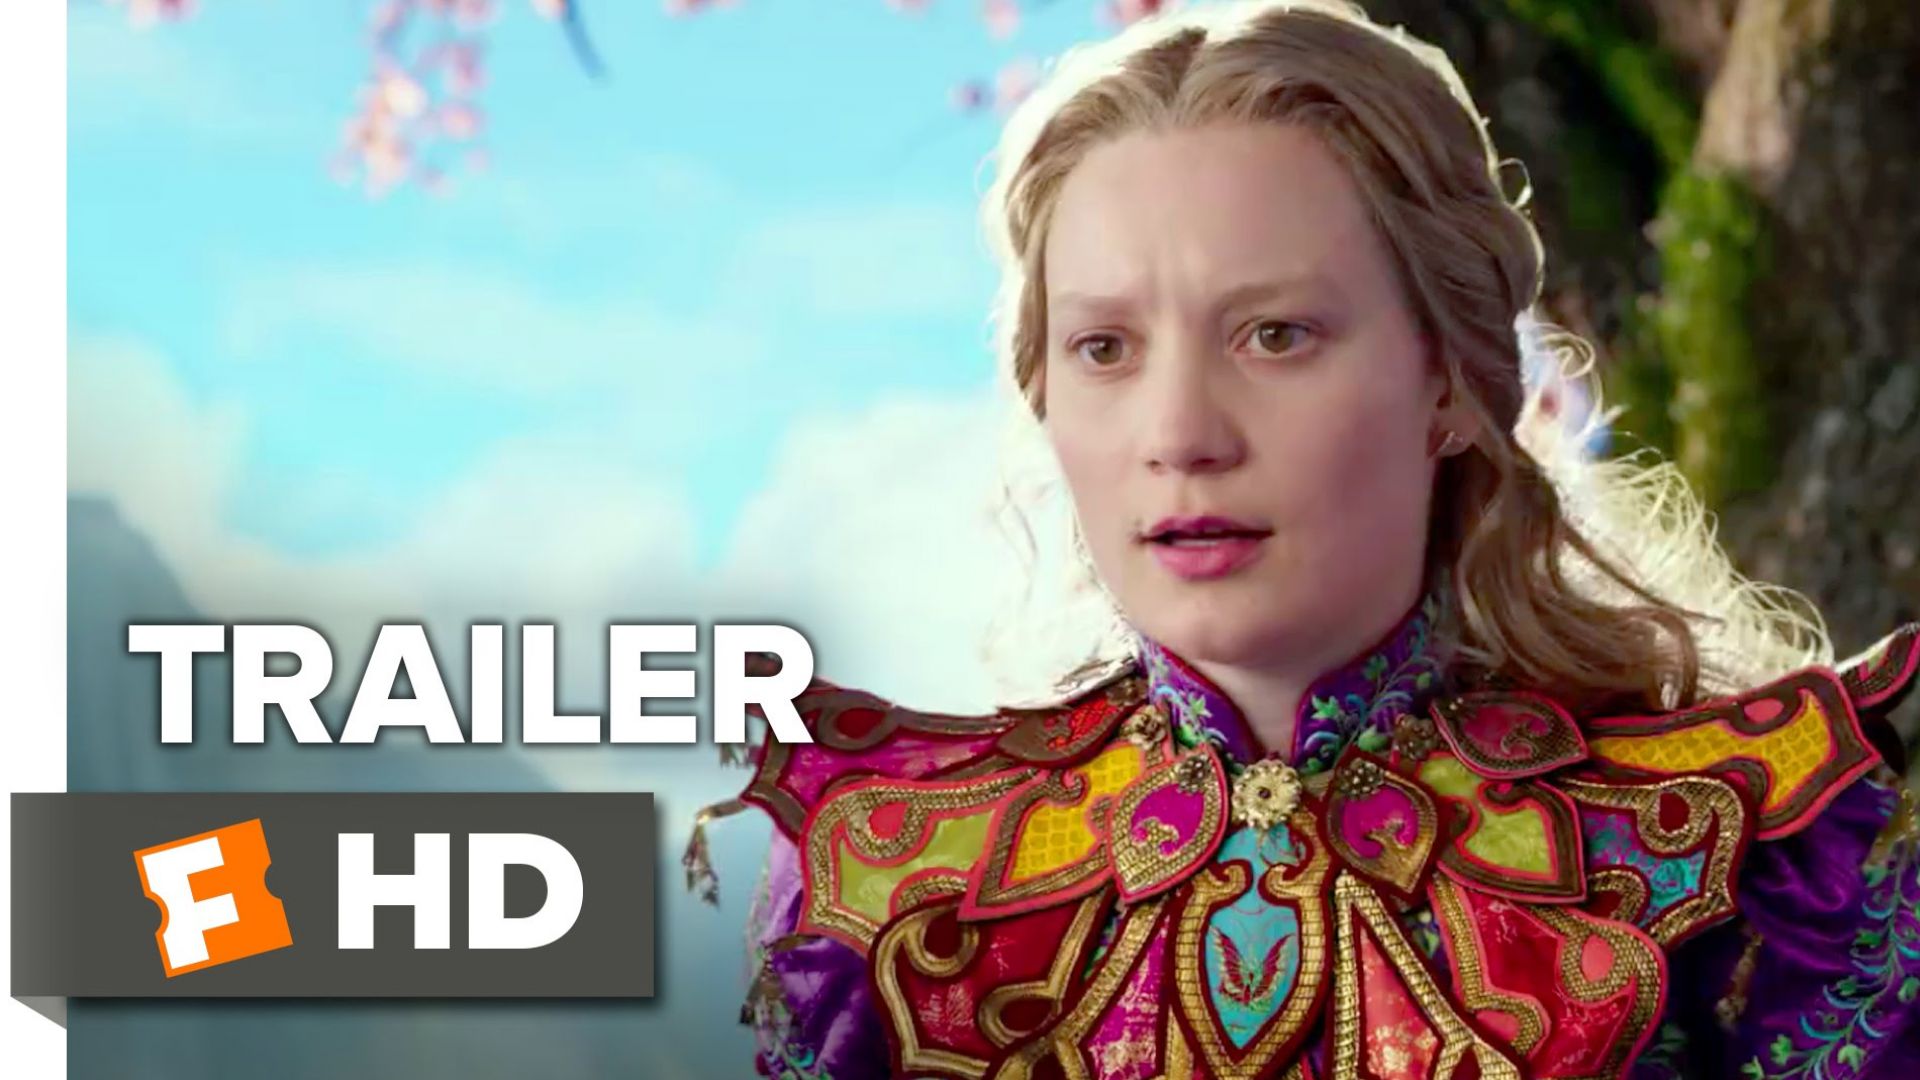 &#039;Alice Through The Looking Glass&#039; Trailer 2. Opens on May 27